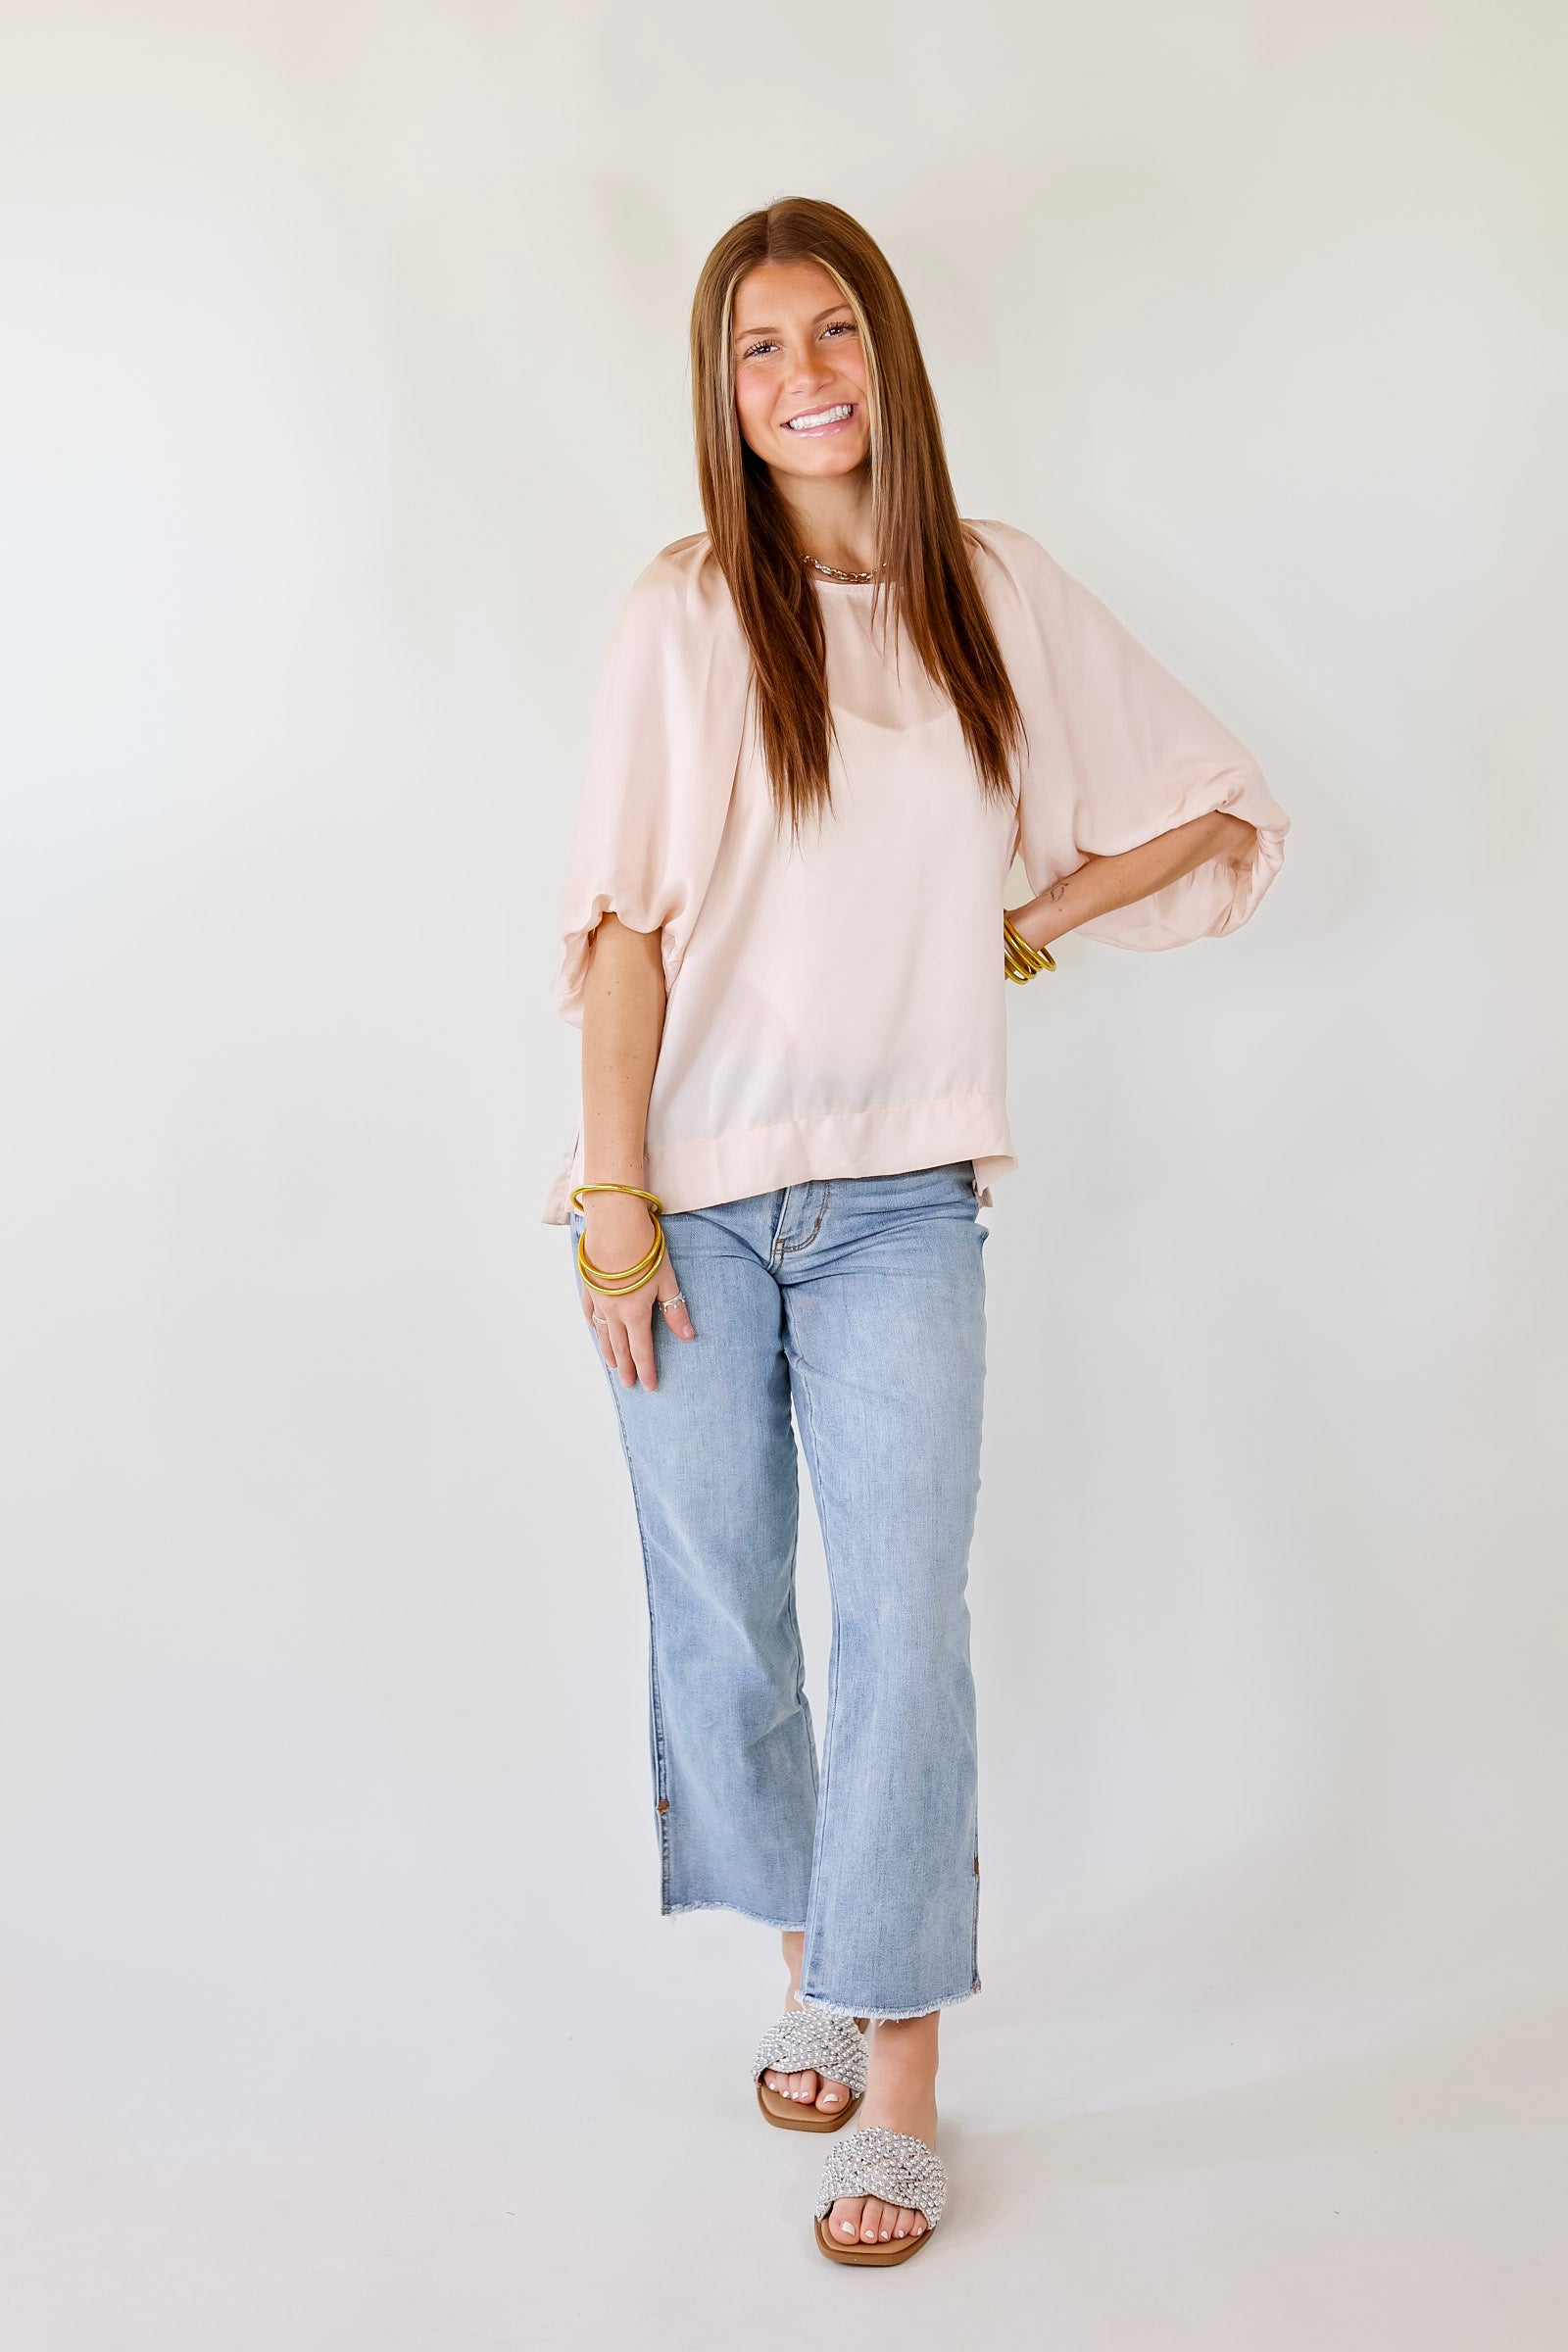 Flash A Smile Half Balloon Sleeve Satin Blouse in Champagne - Giddy Up Glamour Boutique